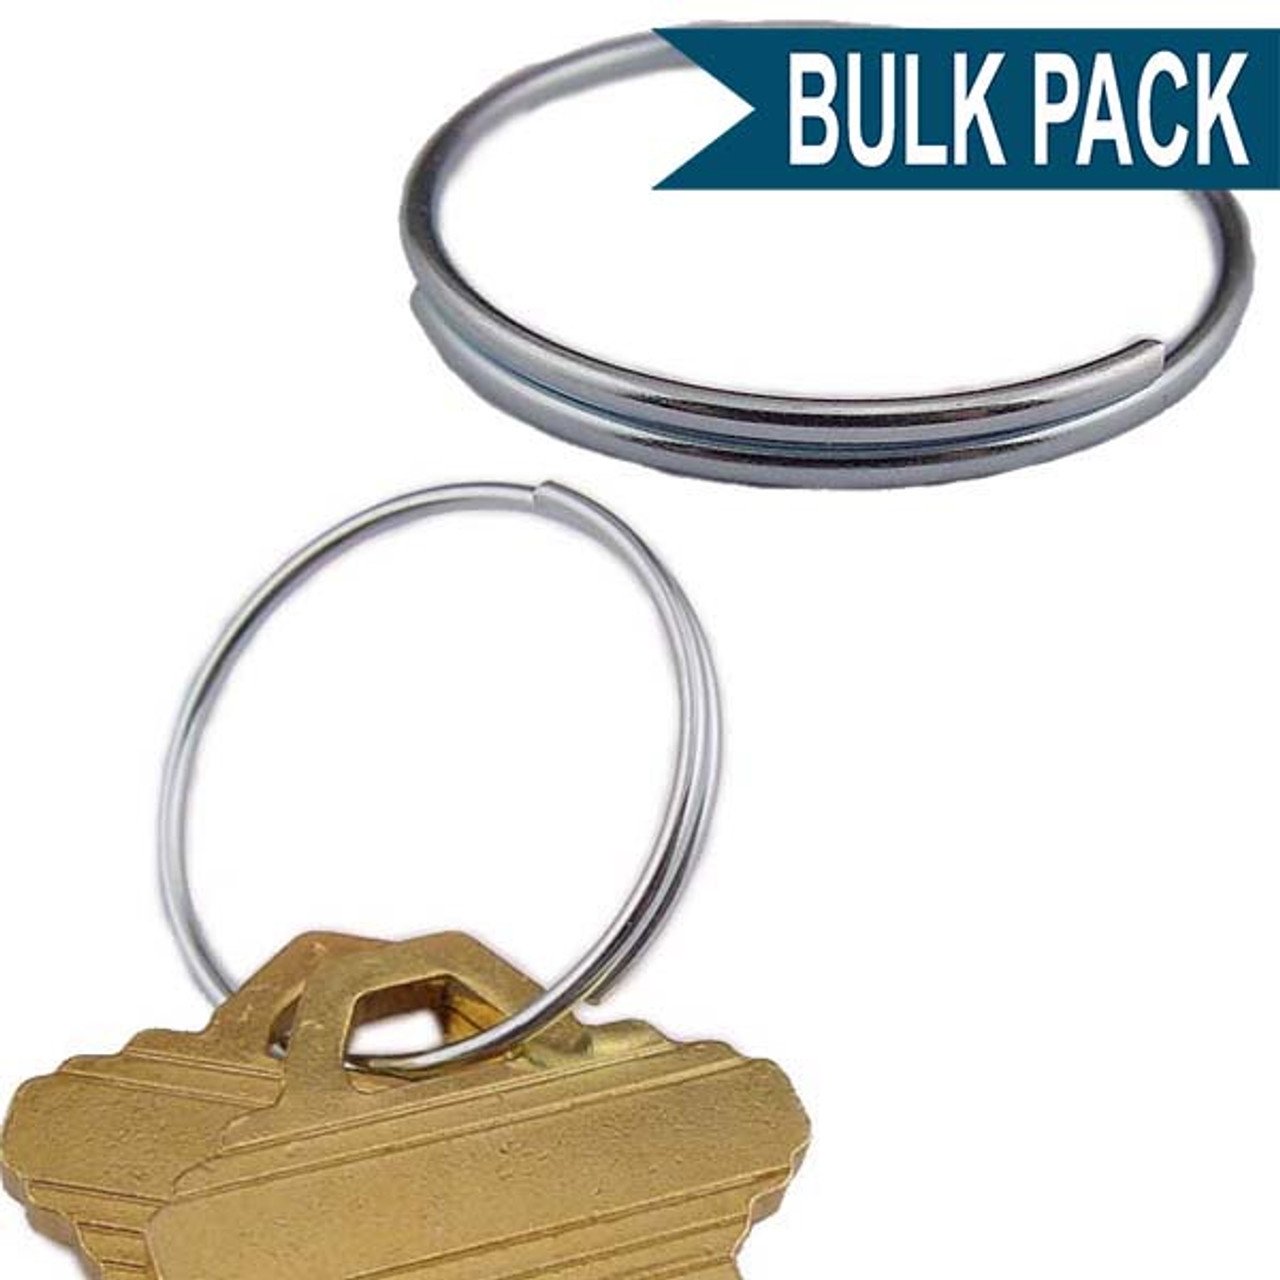 https://cdn11.bigcommerce.com/s-k4as3uan8i/images/stencil/1280x1280/products/660/4566/90200-1-inch-inexpensive-wire-keyring-comp-ribbon-bulk__30277.1604524709.jpg?c=1